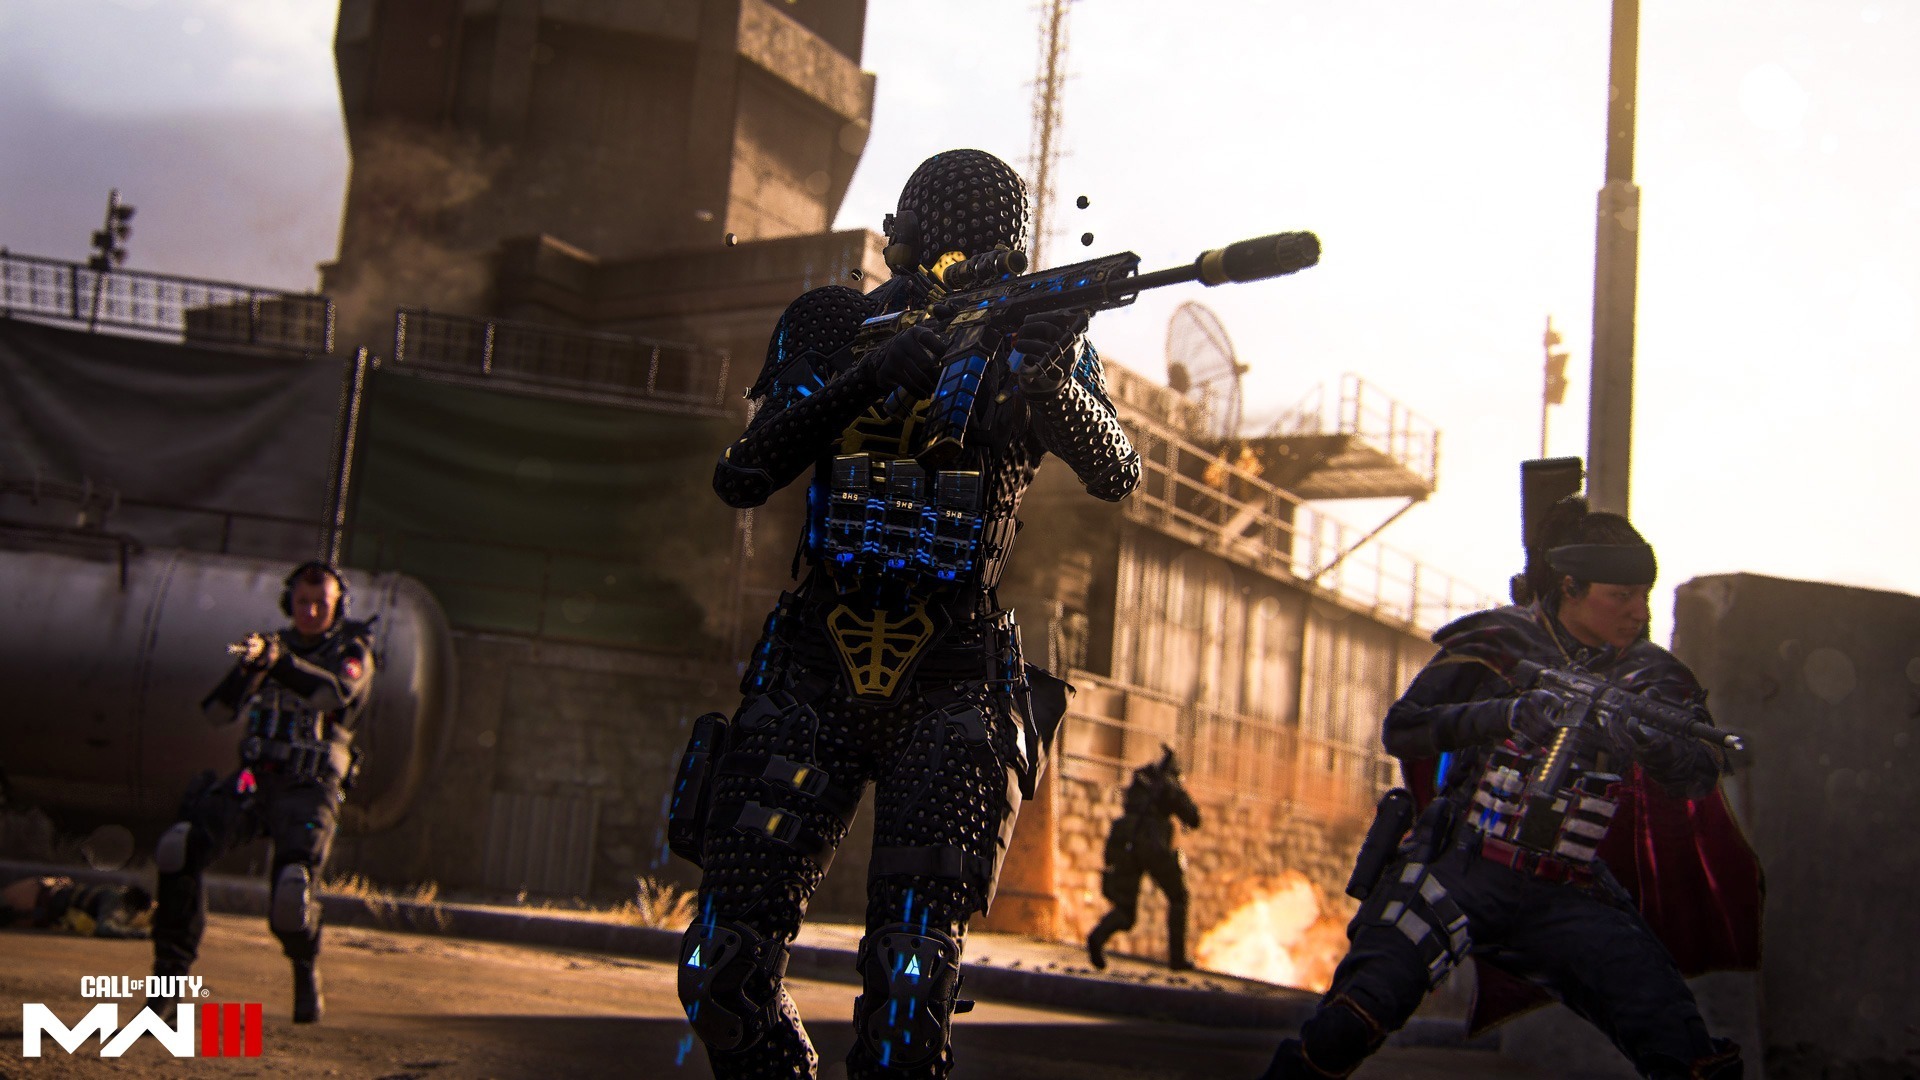 MW3 And Warzone Season 3 Patch Notes: Release Date, Battle Pass, Zombies, Rebirth Island, Advanced Warfare Theme Roadmap, Weapons, Content, Bundles And Everything You Need To Know